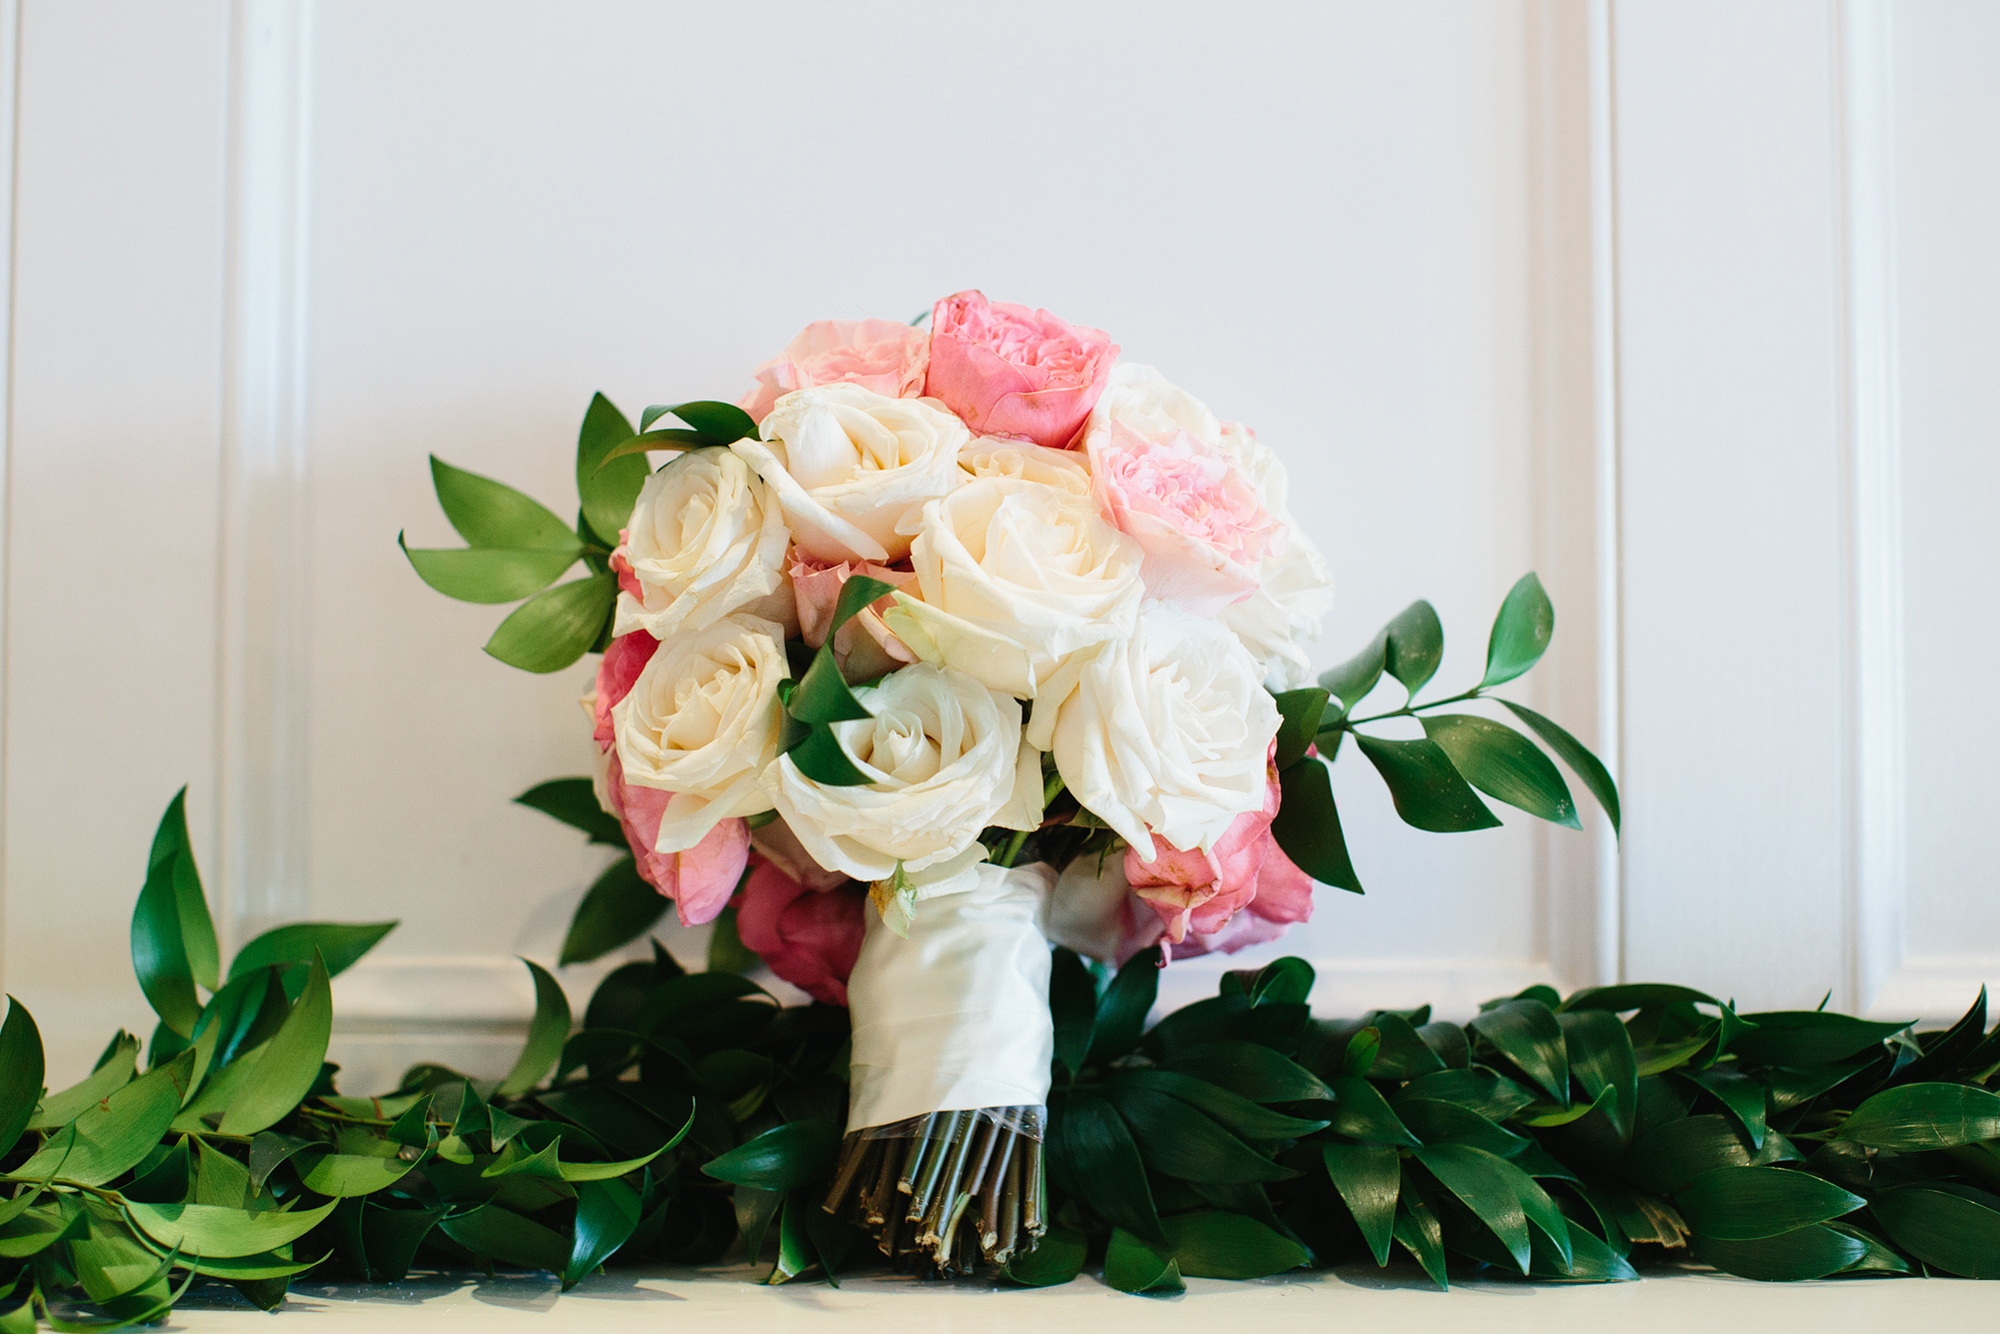 The bride's pink and white bouquet. 